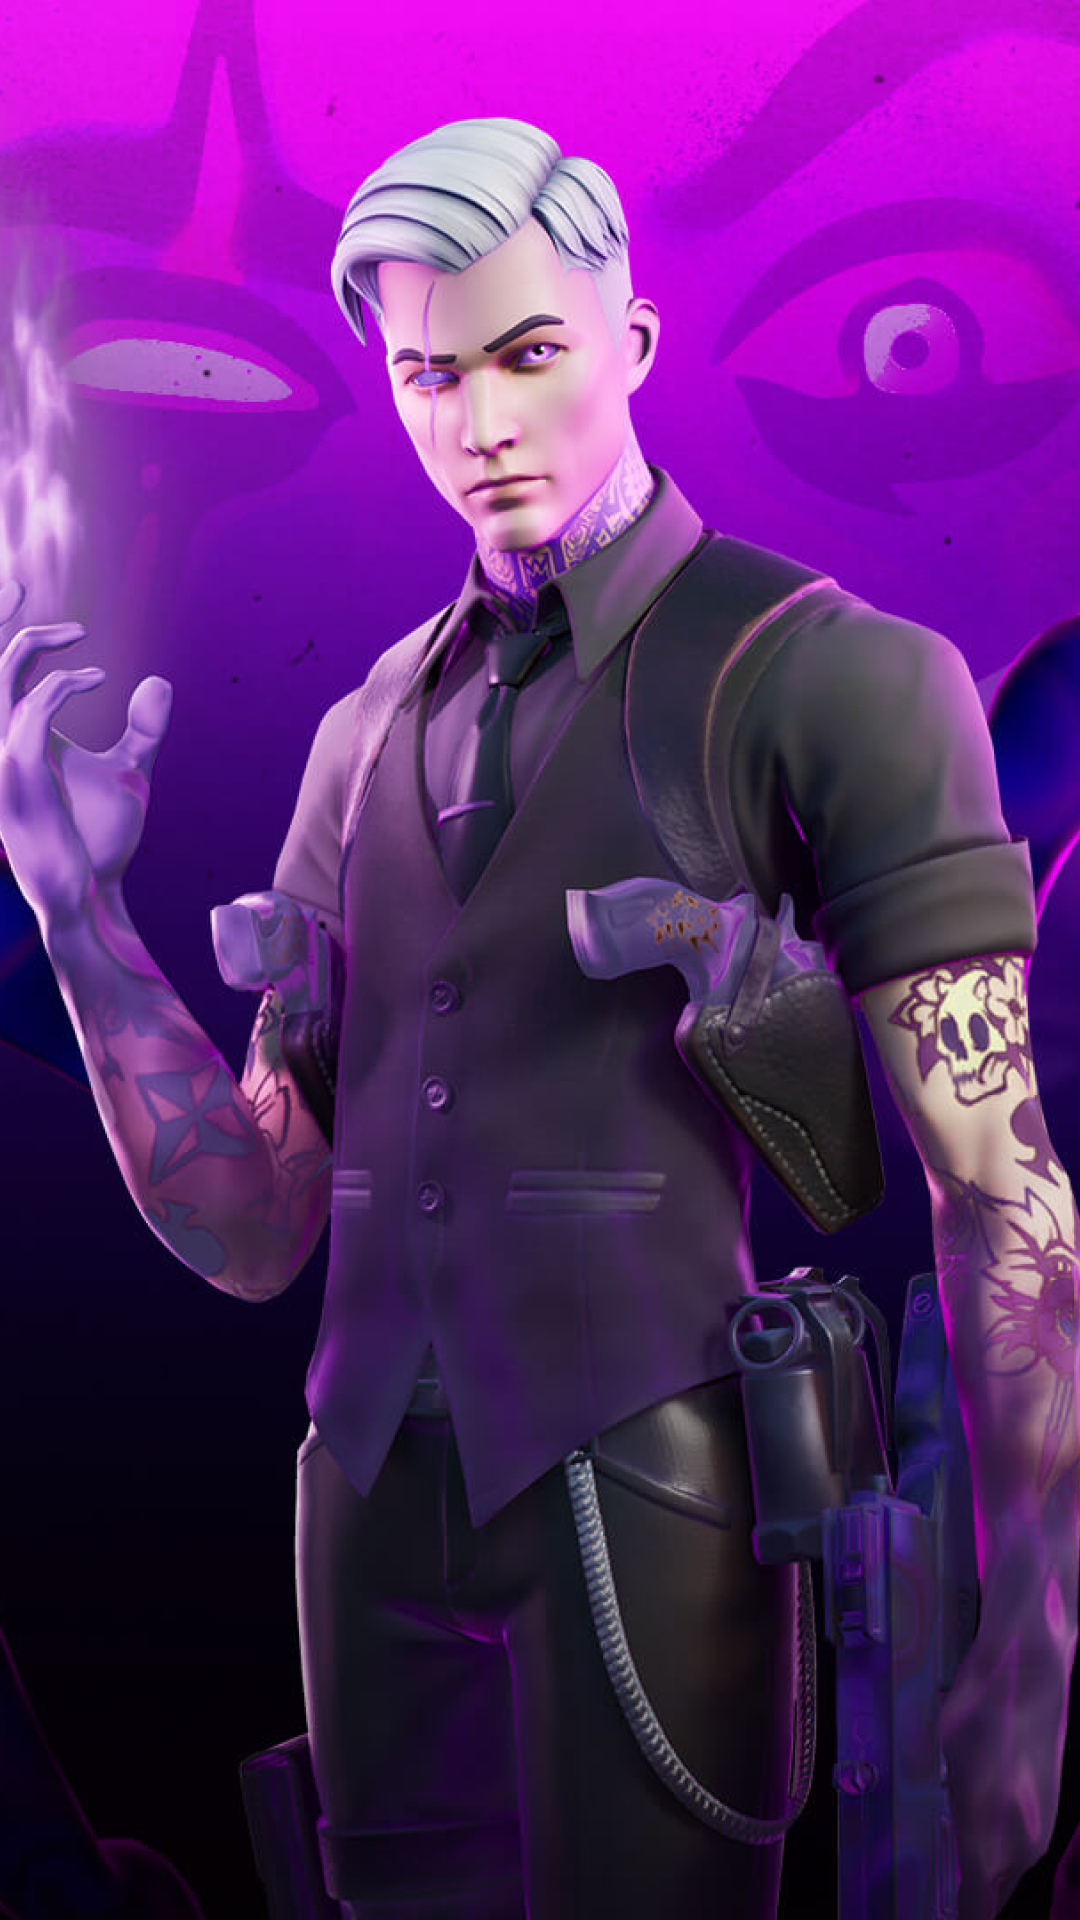 1080x1920-midas-fortnitemares-2020-iphone-7-6s-6-plus-and-pixel-xl